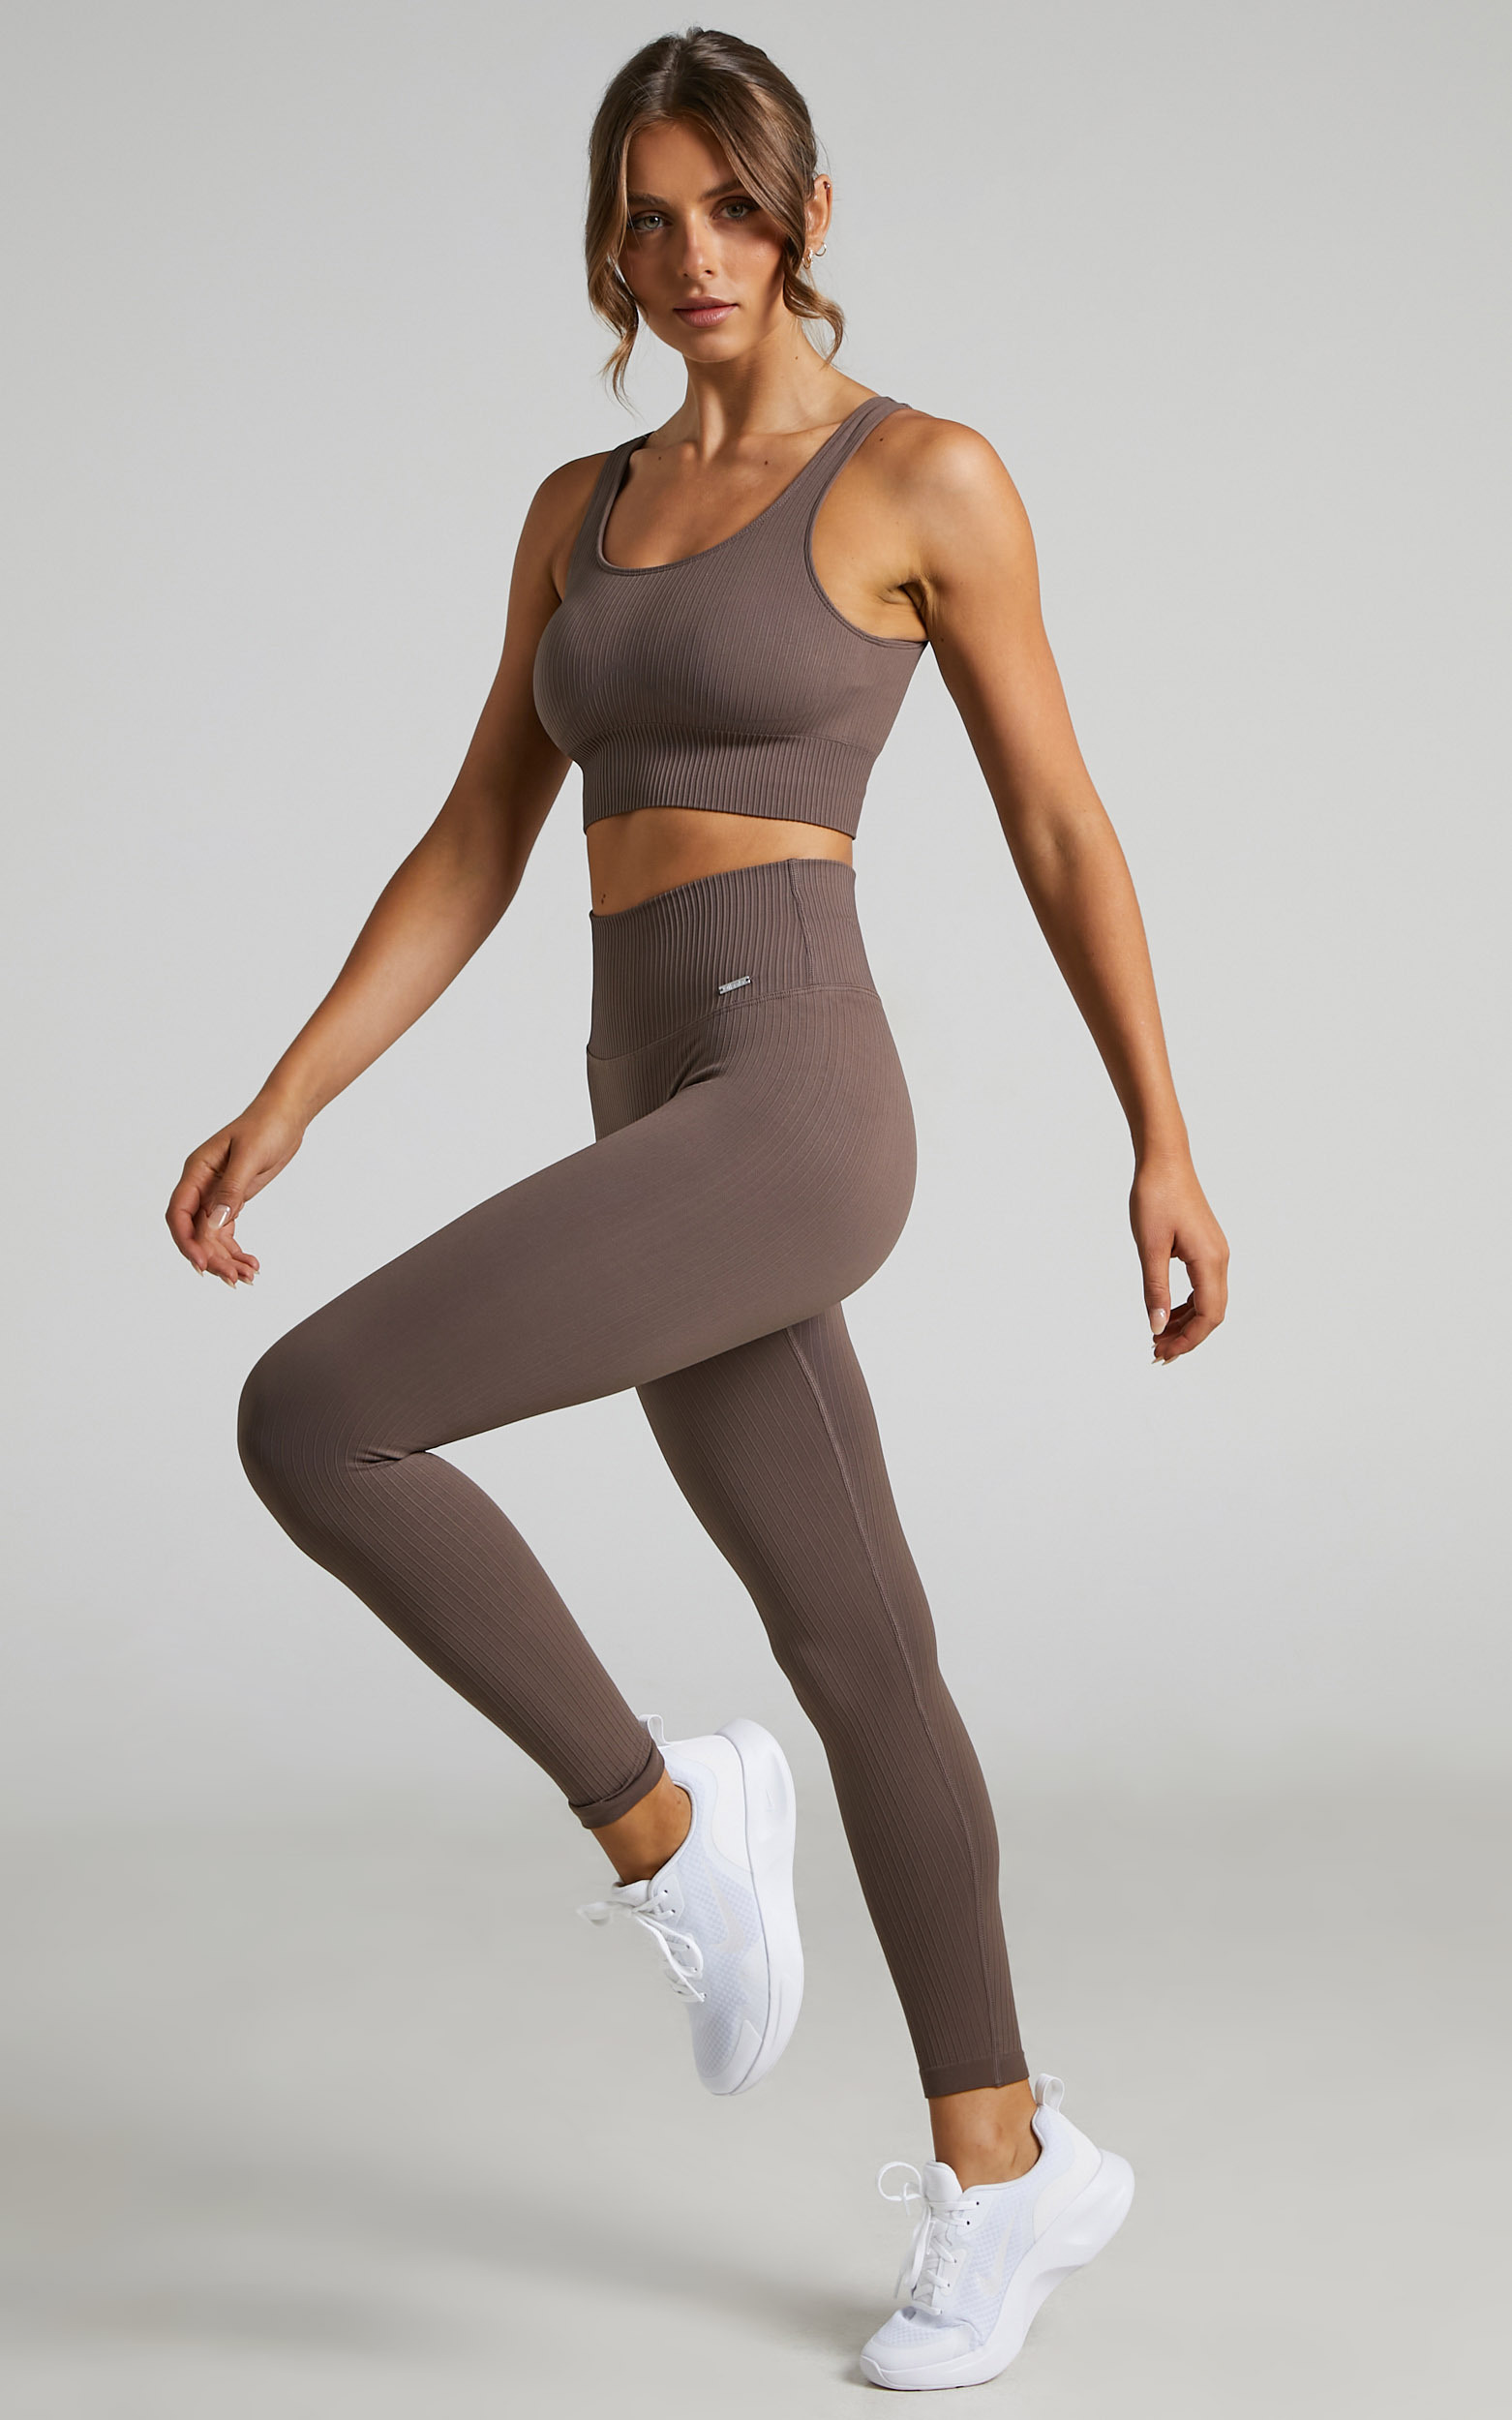 Aim'n - RIBBED SEAMLESS TIGHTS in MACCHIATO - L, BRN1, hi-res image number null